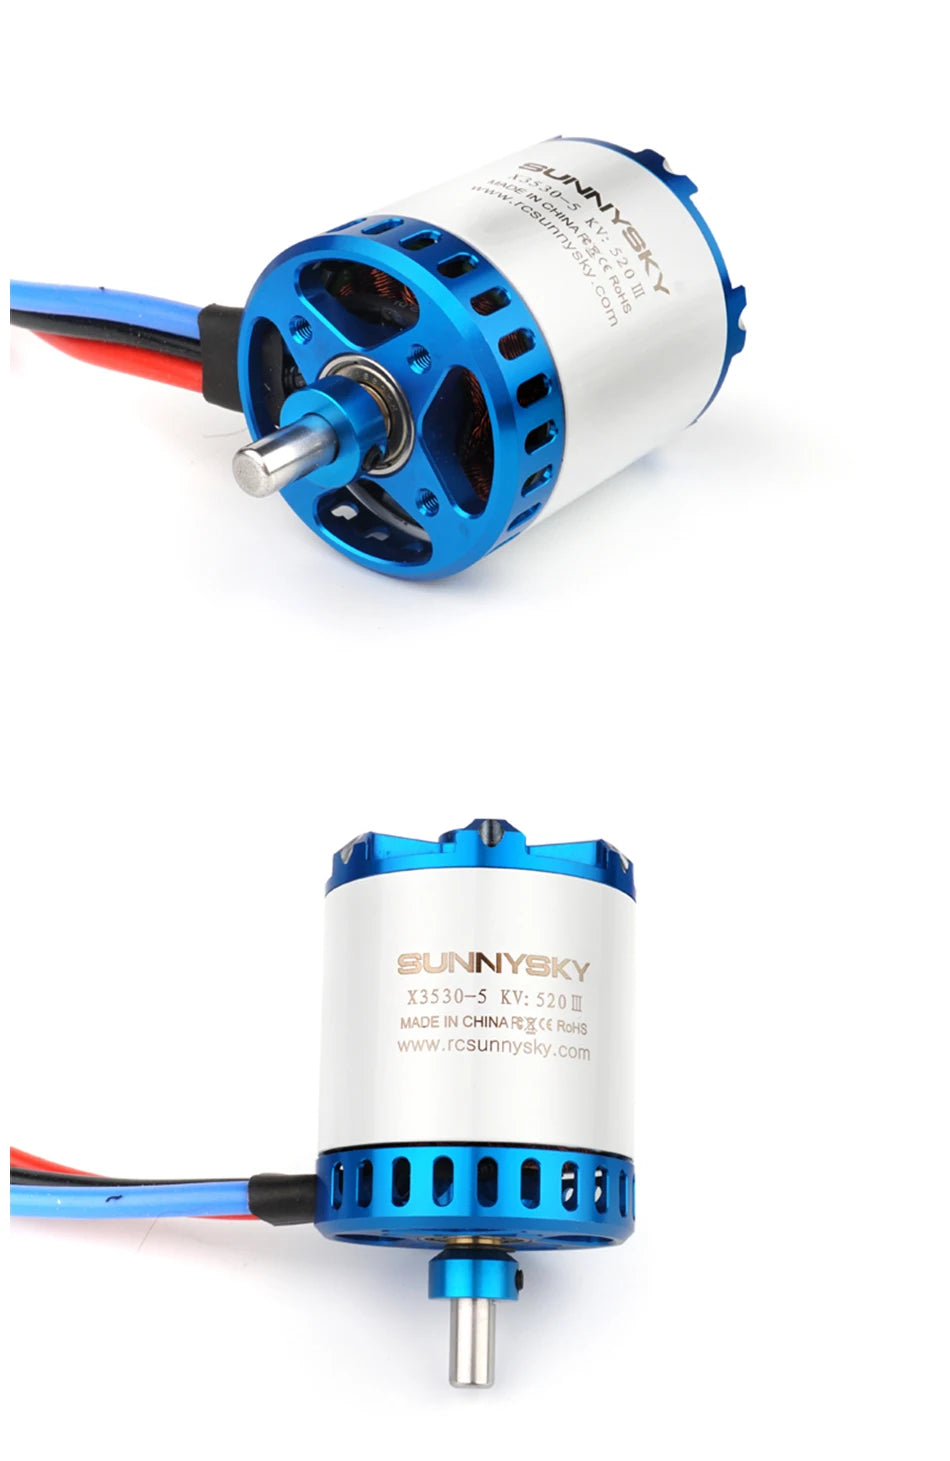 1/2/4PCS SUNNYSKY X3520-III X3530-III, Brushless Motor for RC Quadcopter Airplanes Fixed Wing UAV Plane